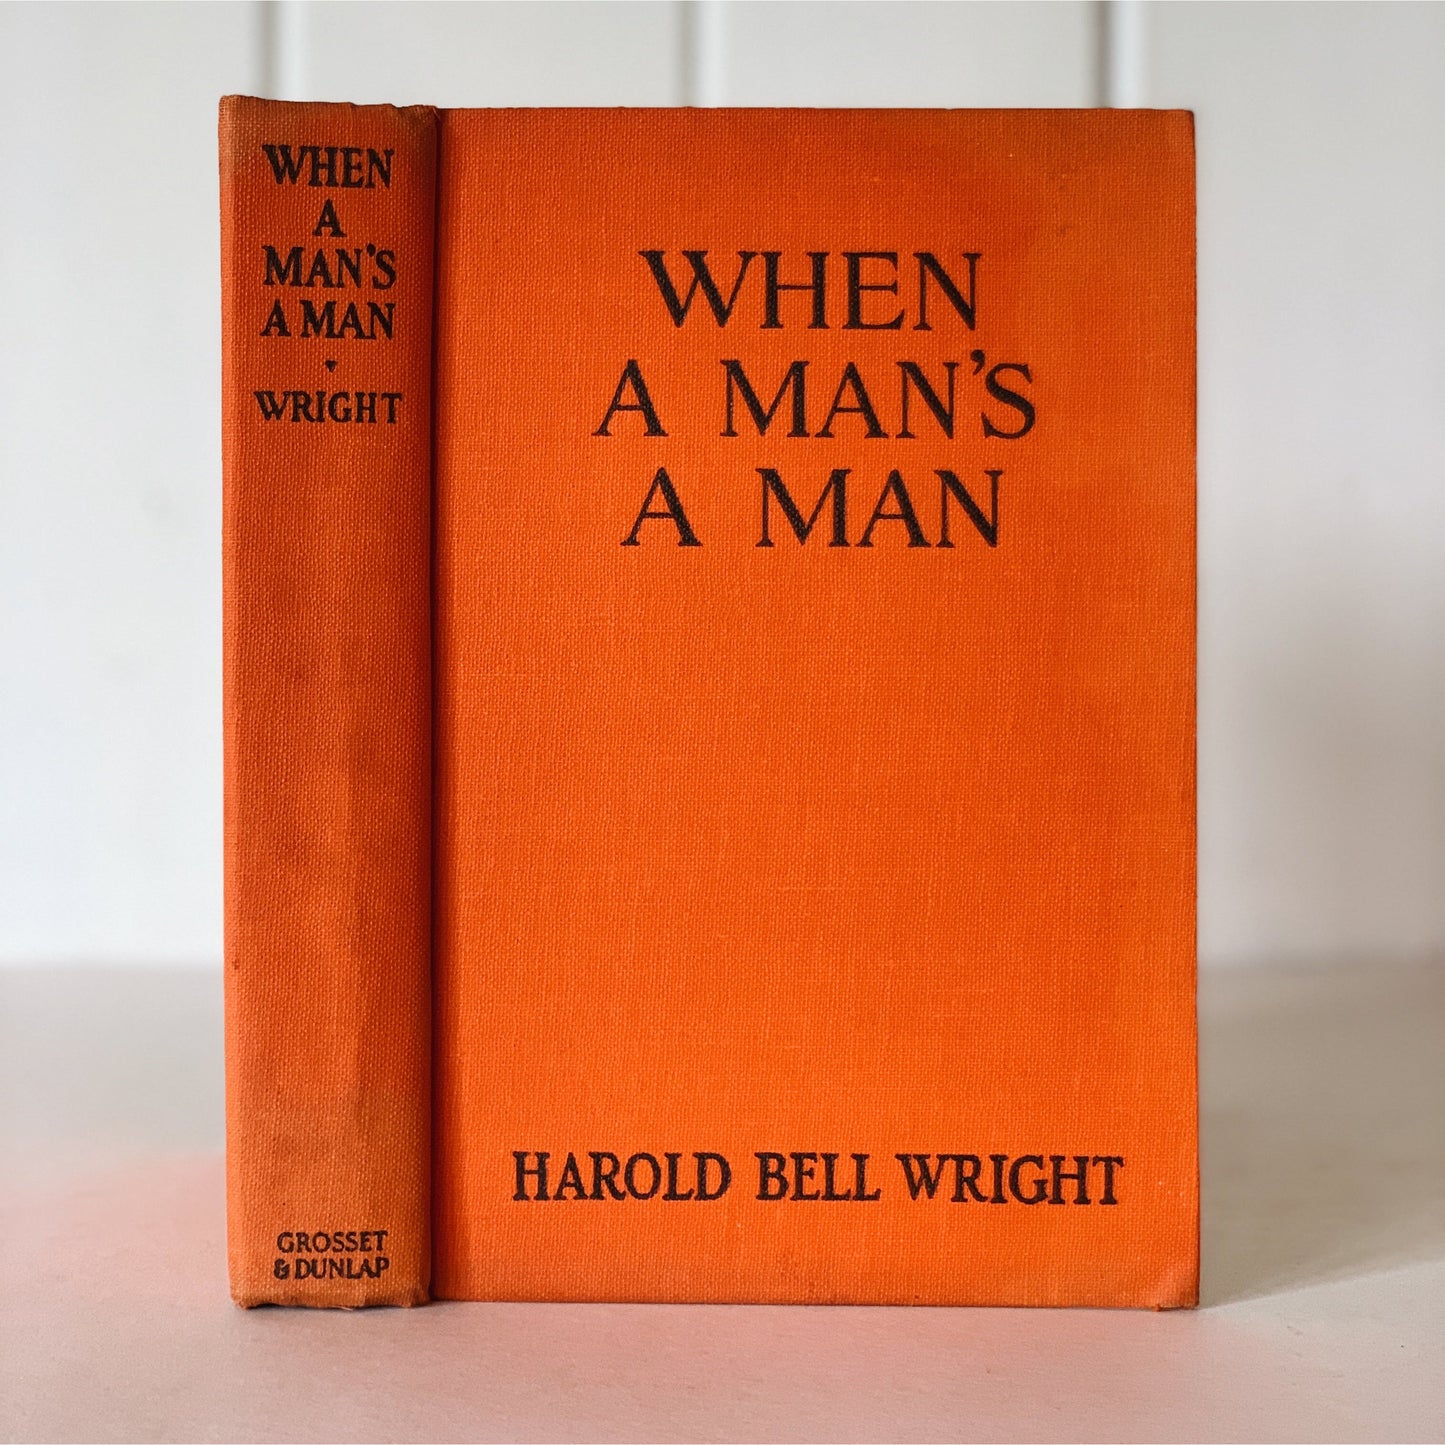 When a Man's a Man, Harold Bell Wright, Hardcover with Dust Jacket, 1916